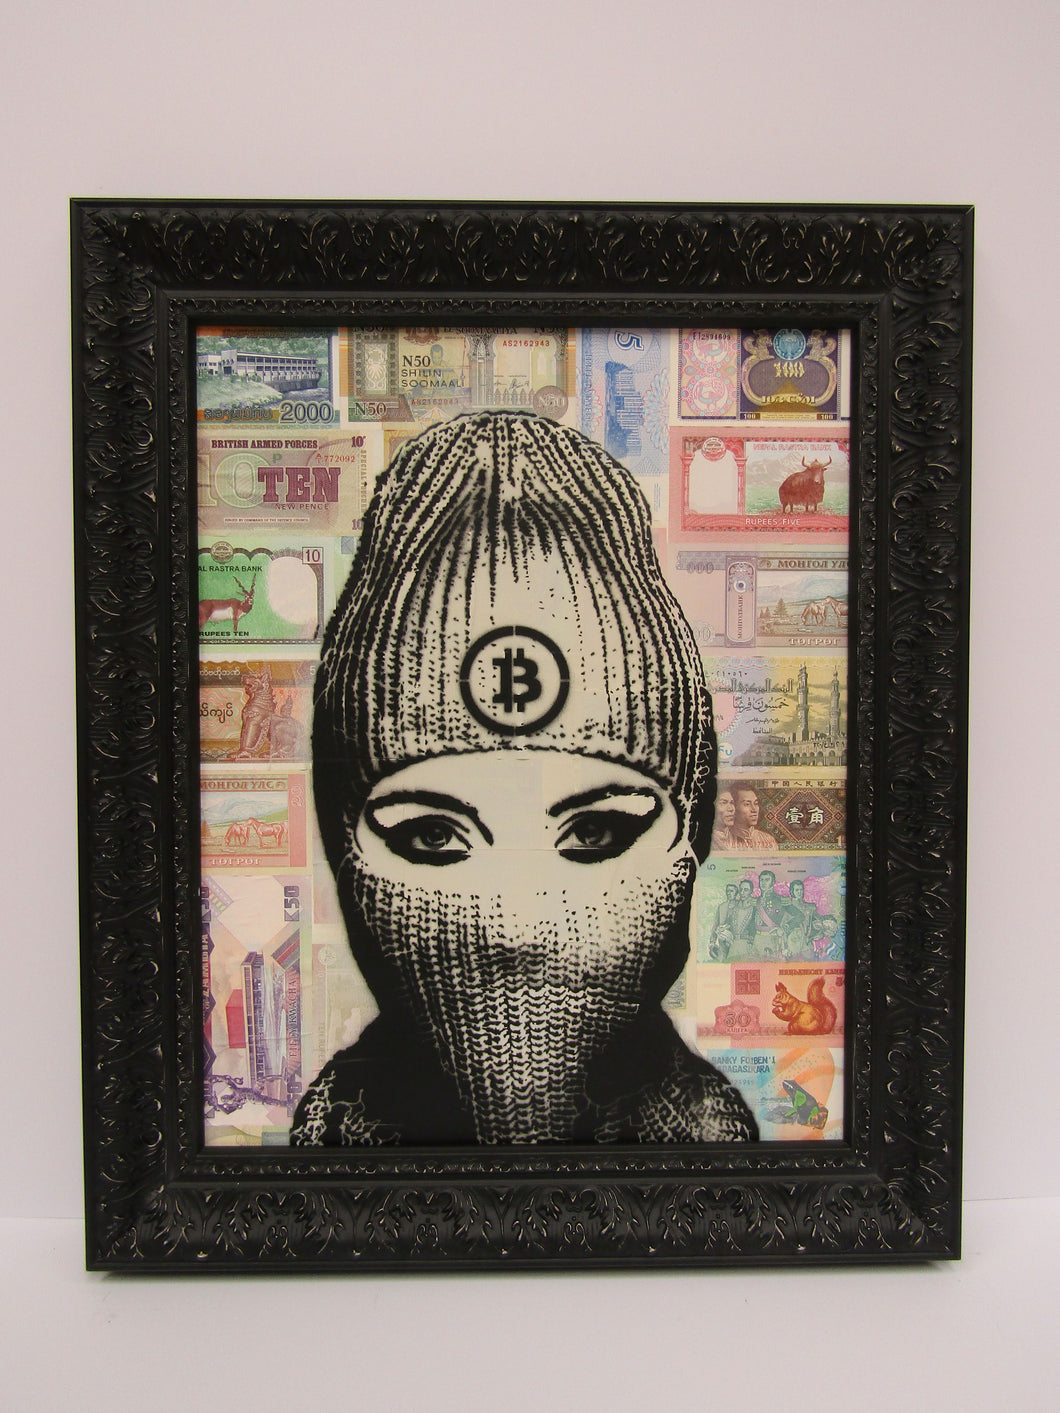 bitcoin over banknotes - 6 of 10